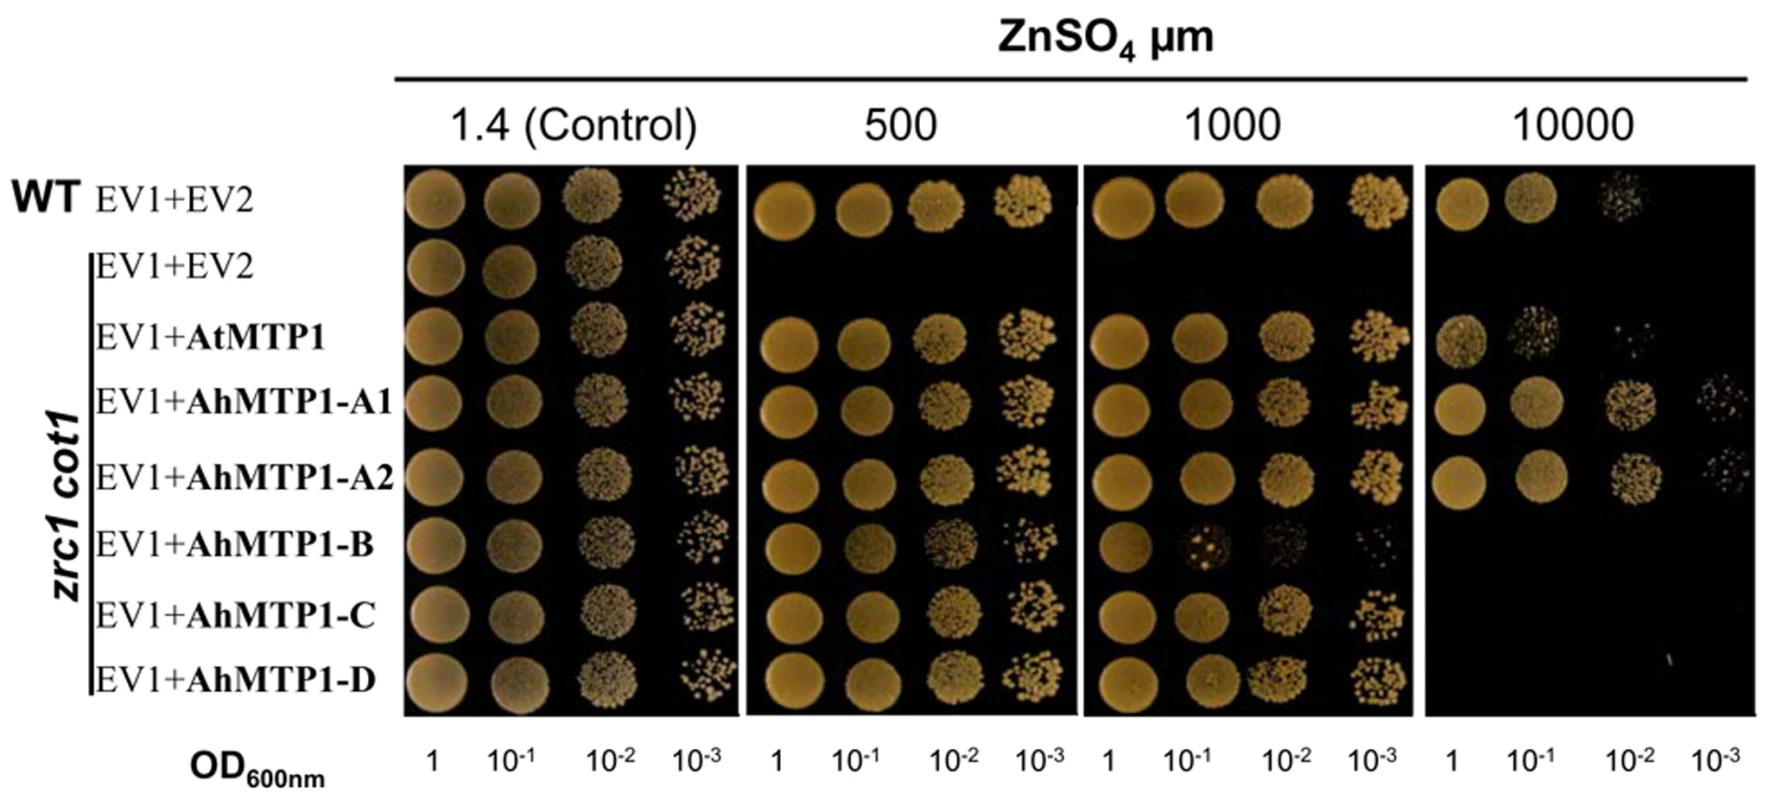 Functional complementation of the zinc-hypersensitivity of the <i>zrc1 cot1</i> yeast mutant by <i>AhMTP1</i>s and <i>AtMTP1</i>.